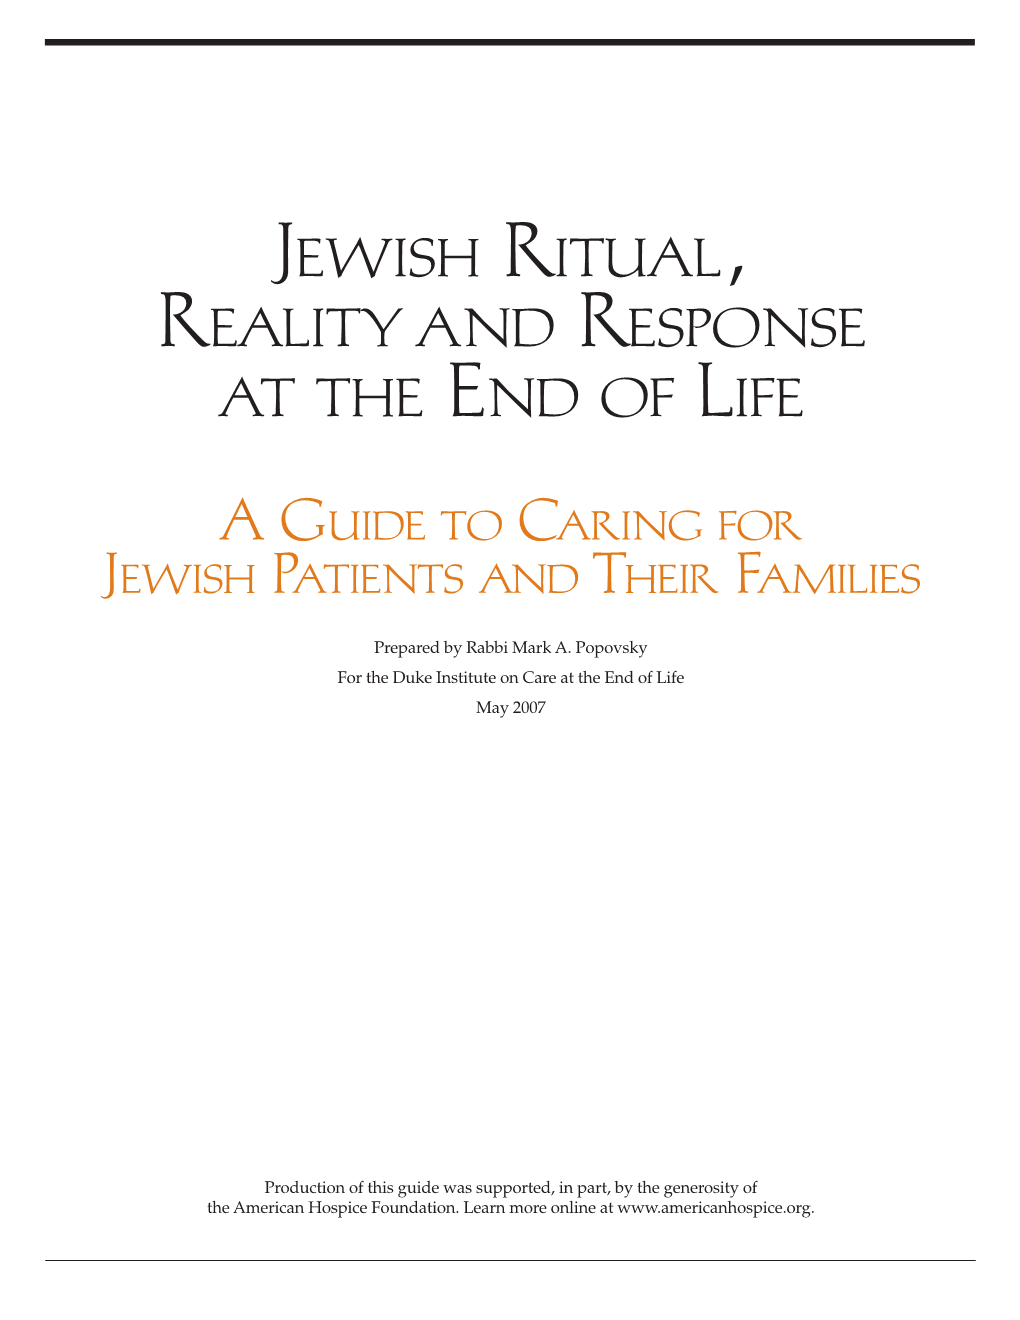 Jewish Ritual, Reality and Response at the End of Life a Guide to Caring for Jewish Patients and Their Families